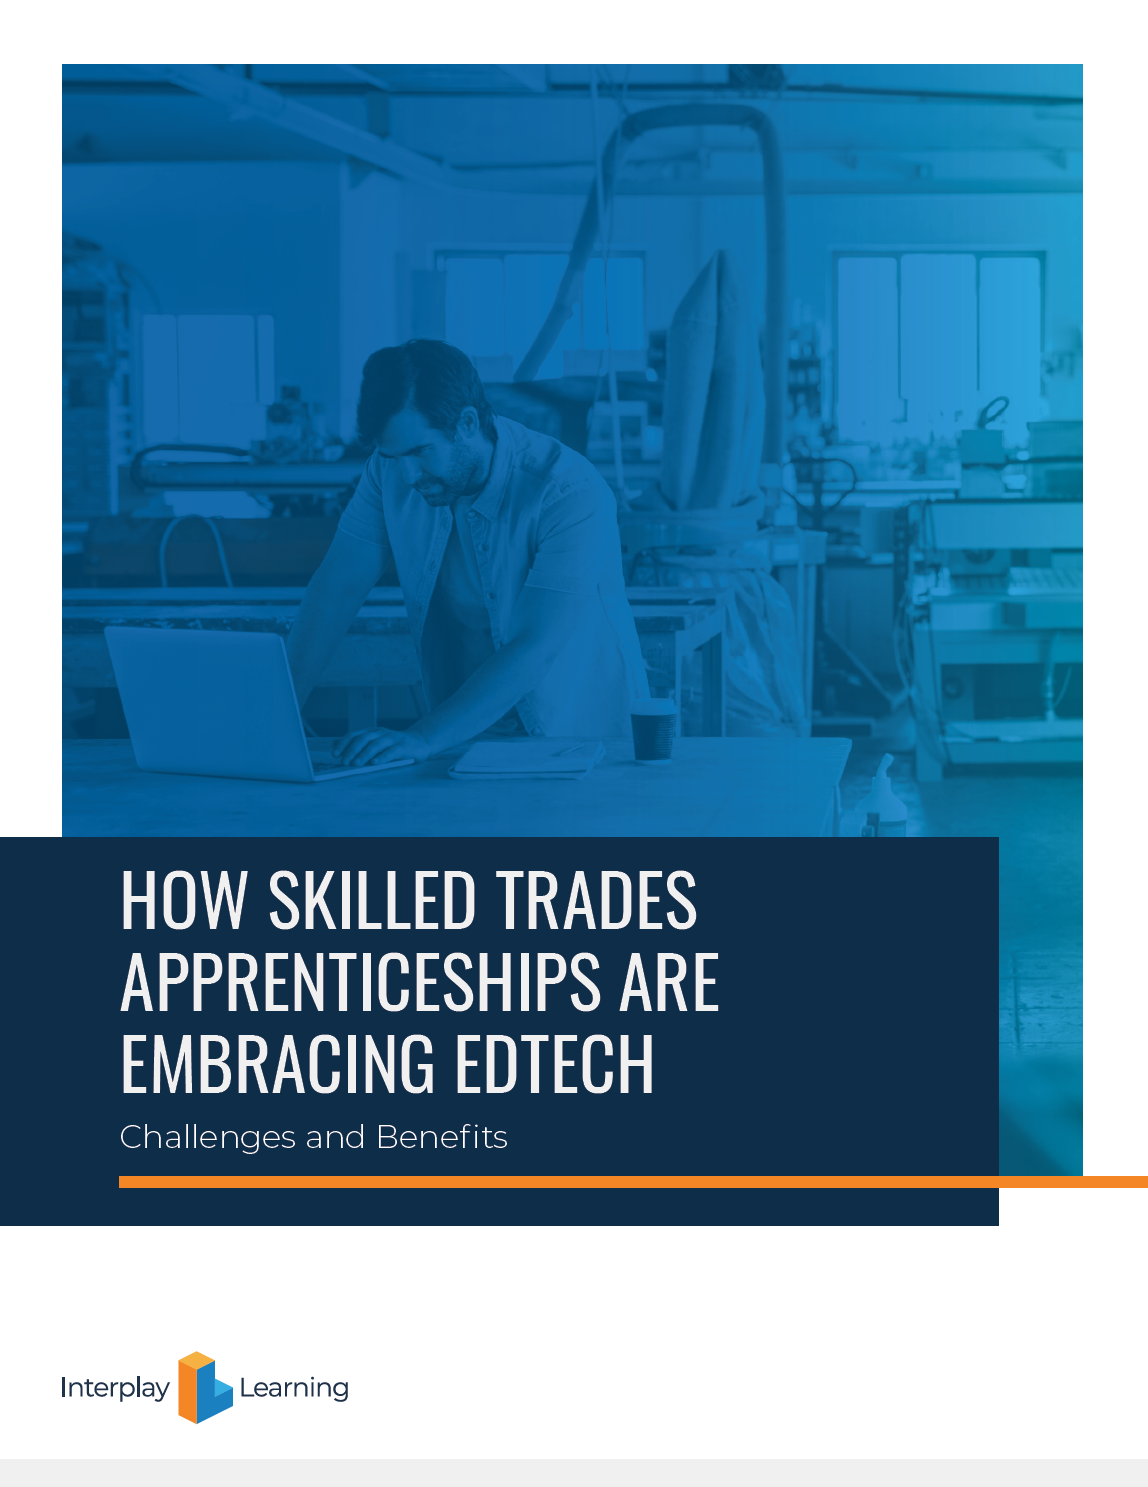 How are Skilled Trades Apprenticeships Embracing EdTech?